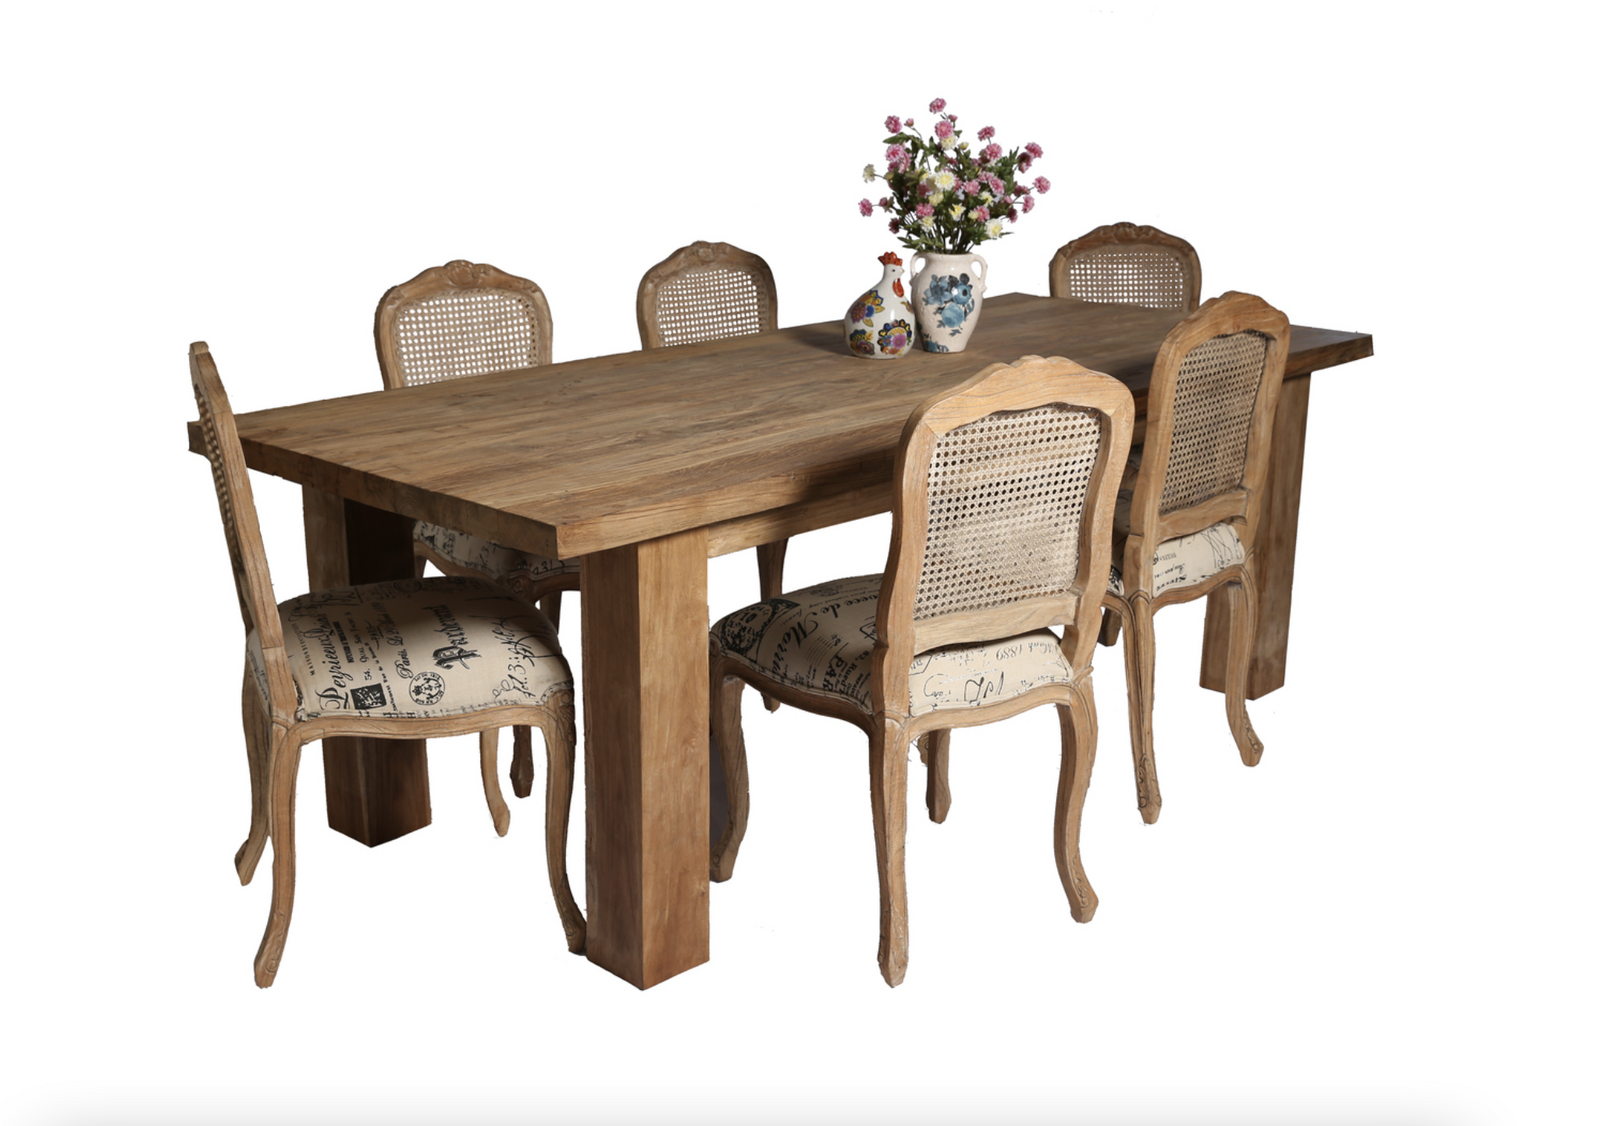 TOWN & COUNTRY | TIMBER DINING TABLE